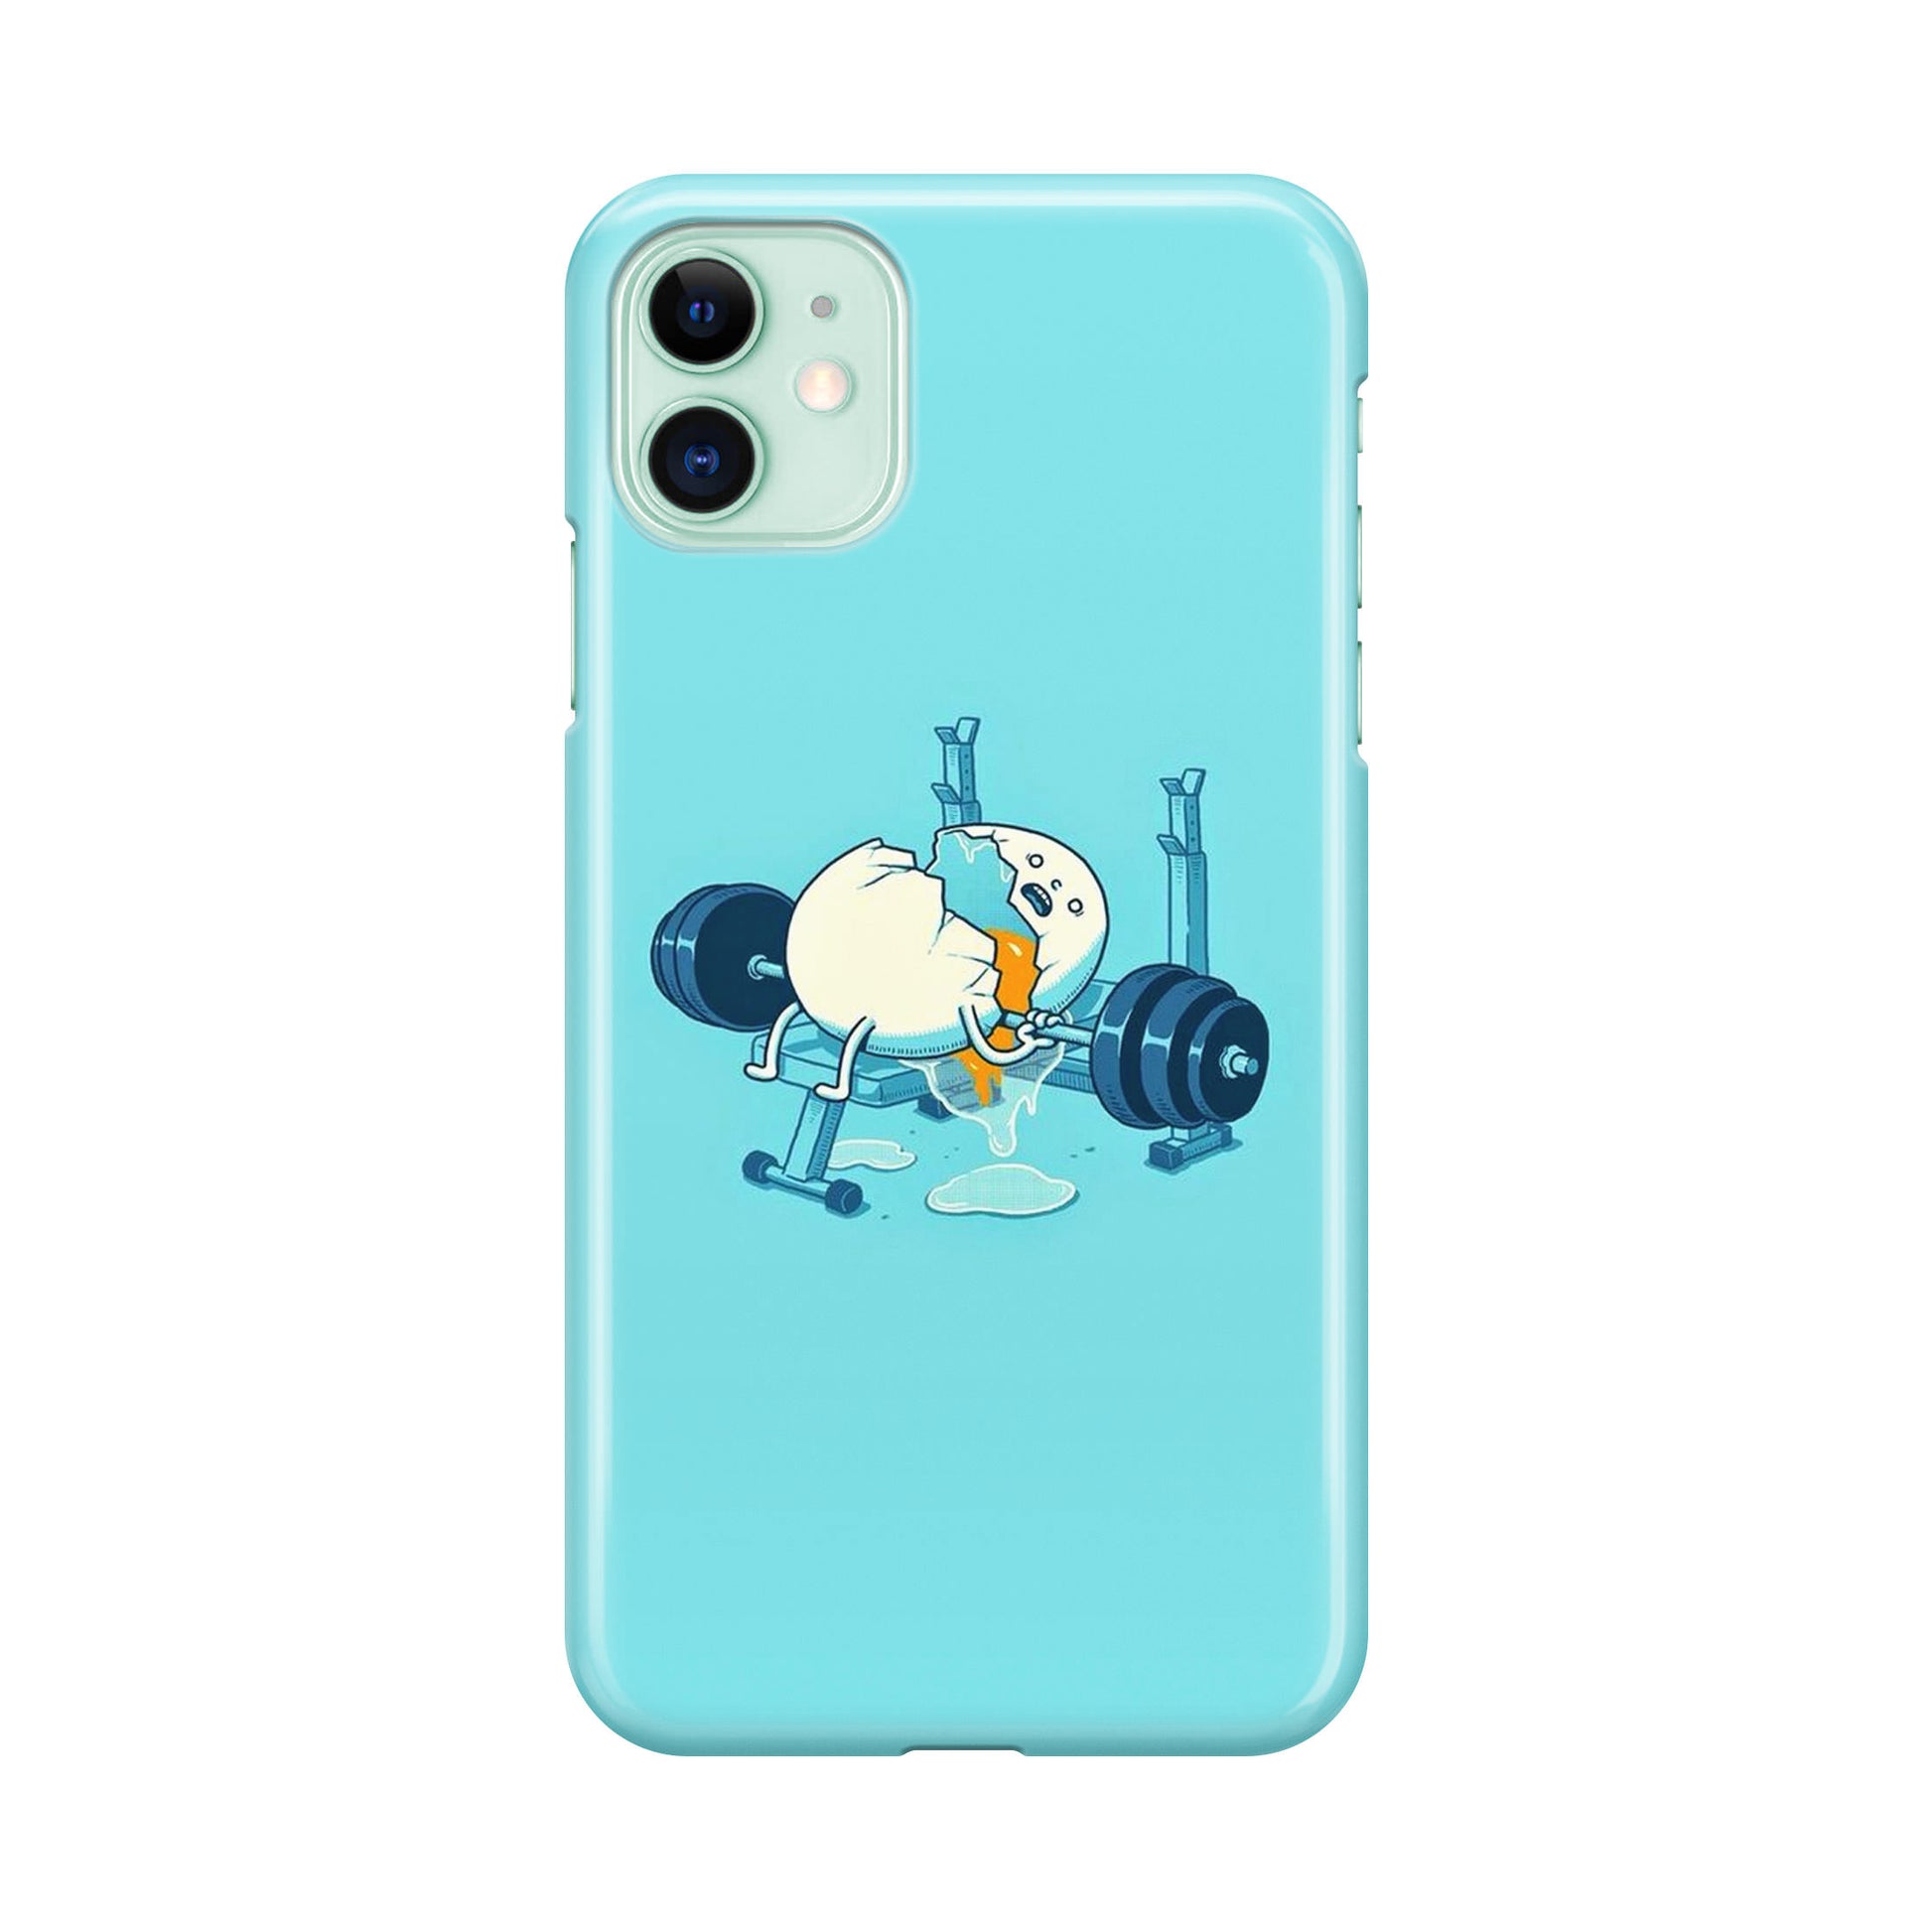 Egg Accident Workout iPhone 12 Case